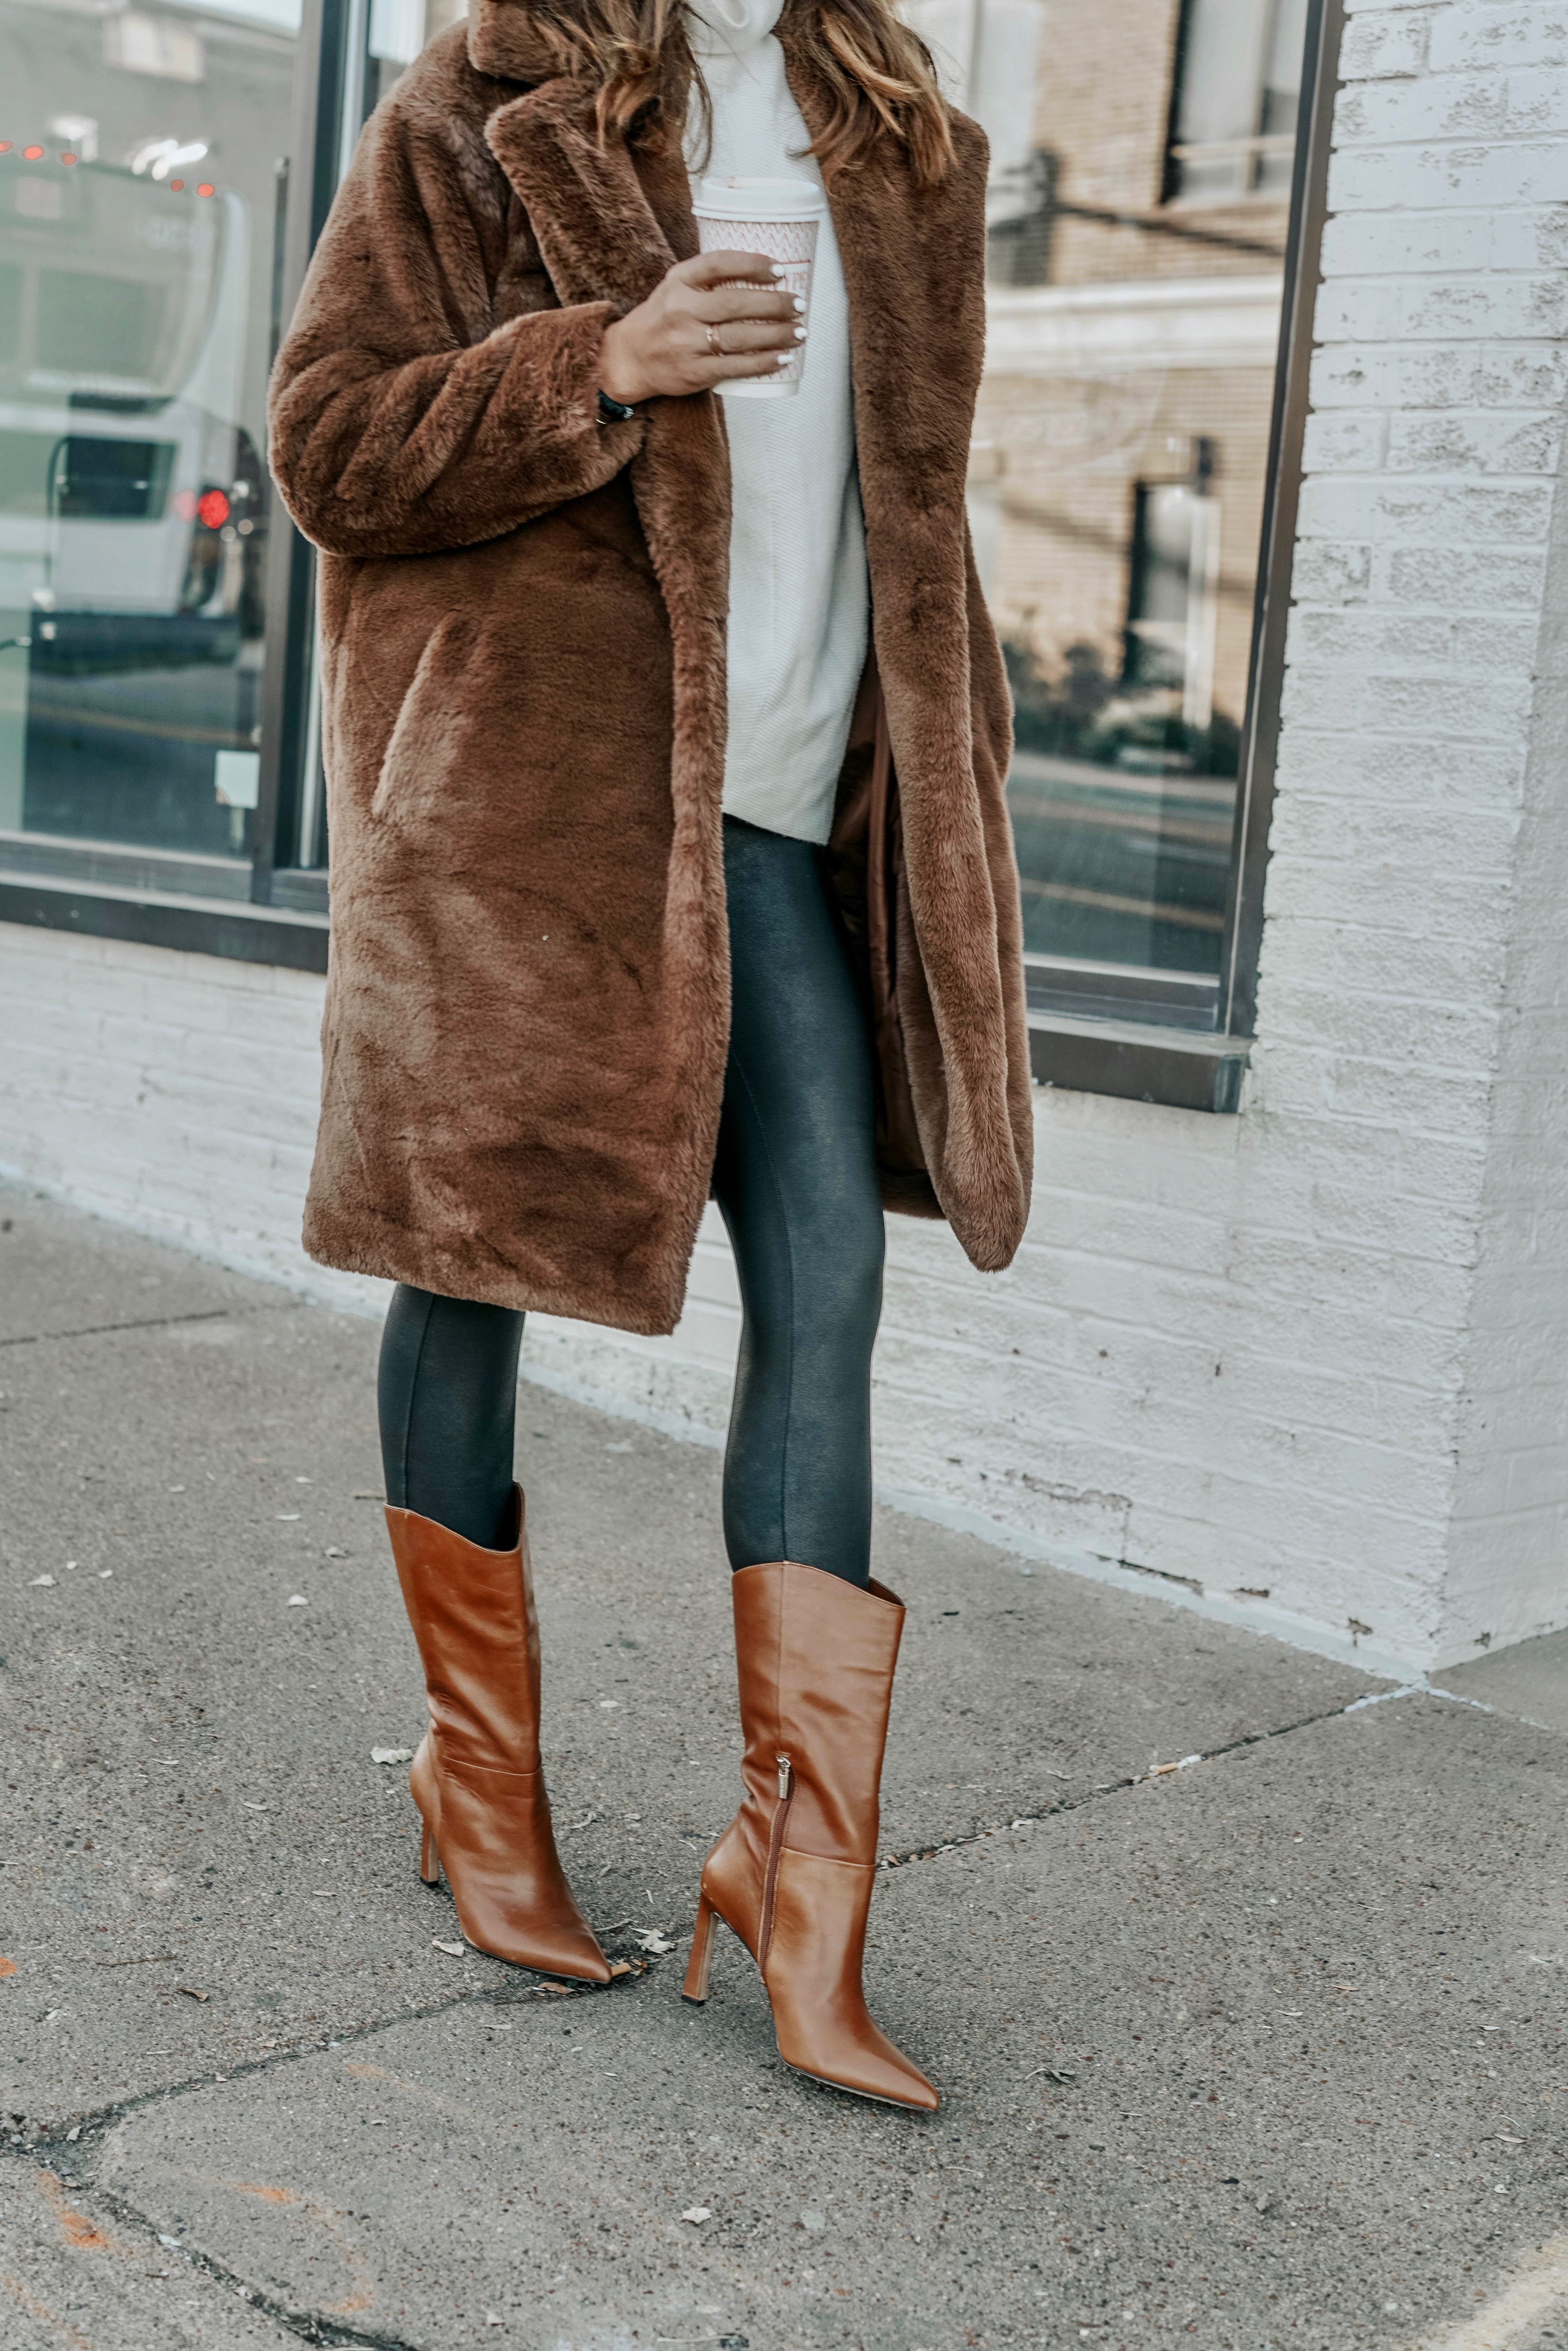 10 Ankle Boots I'm Loving - Sugar Love Chic